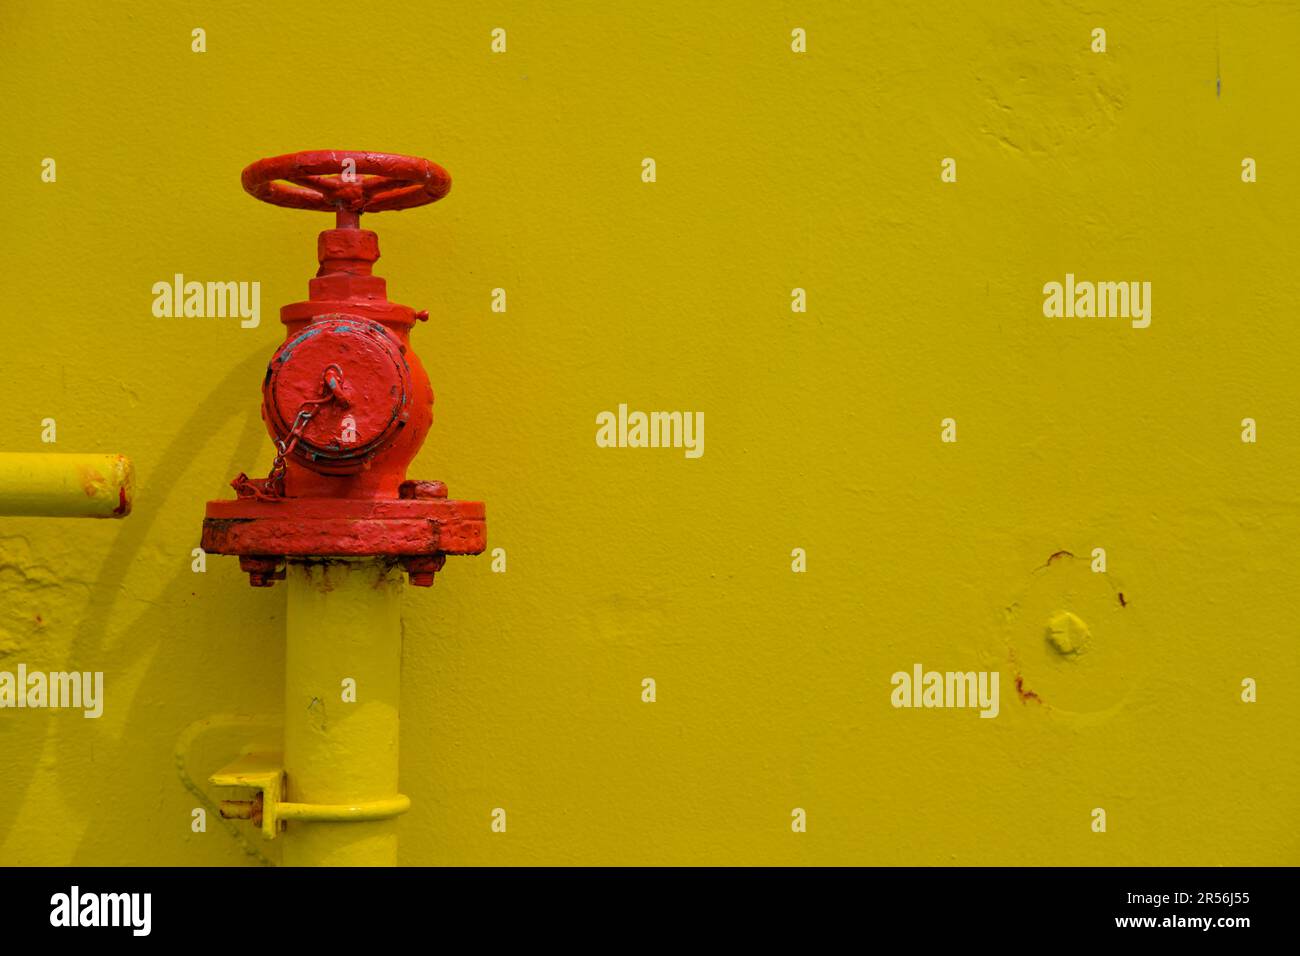 A red painted fire hydrant valve with a wheel for shutting and opening the flow of water. Firefighting hydrant valve painted red on a yellow wall. Stock Photo